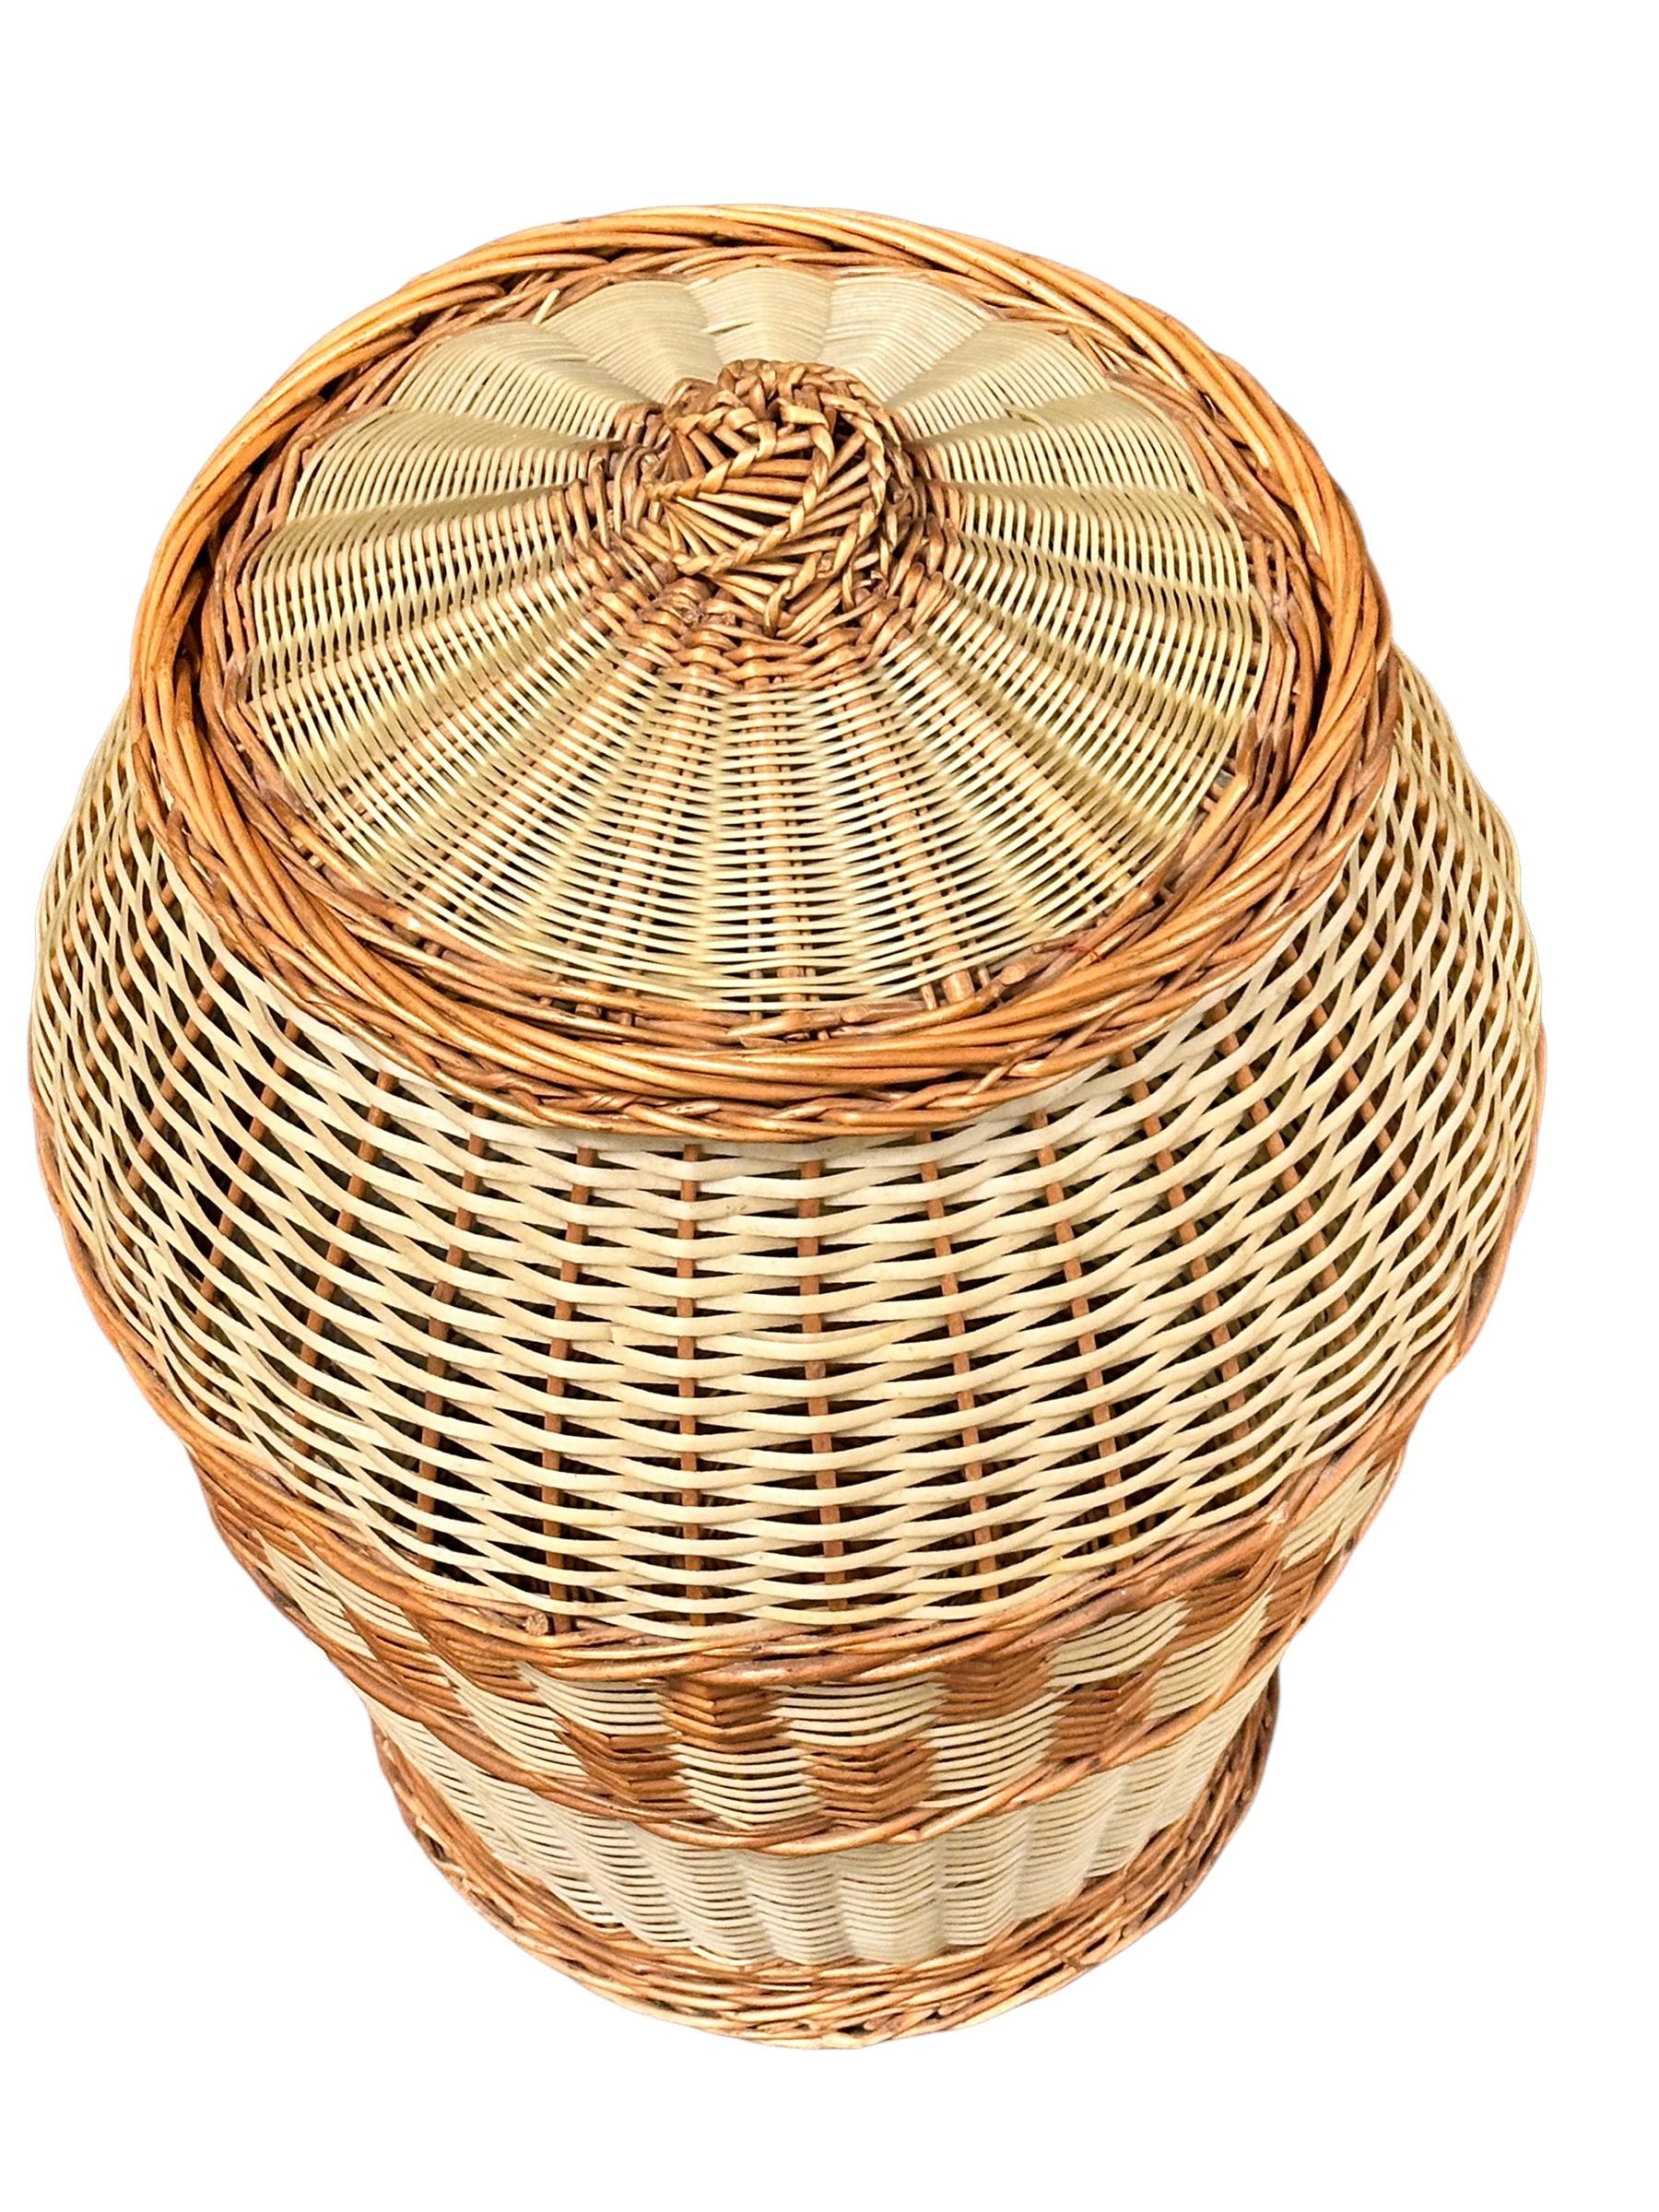 Hand-Crafted Stunning Large Vintage Midcentury Wicker Laundry Basket Hamper, 1970s, Italy For Sale